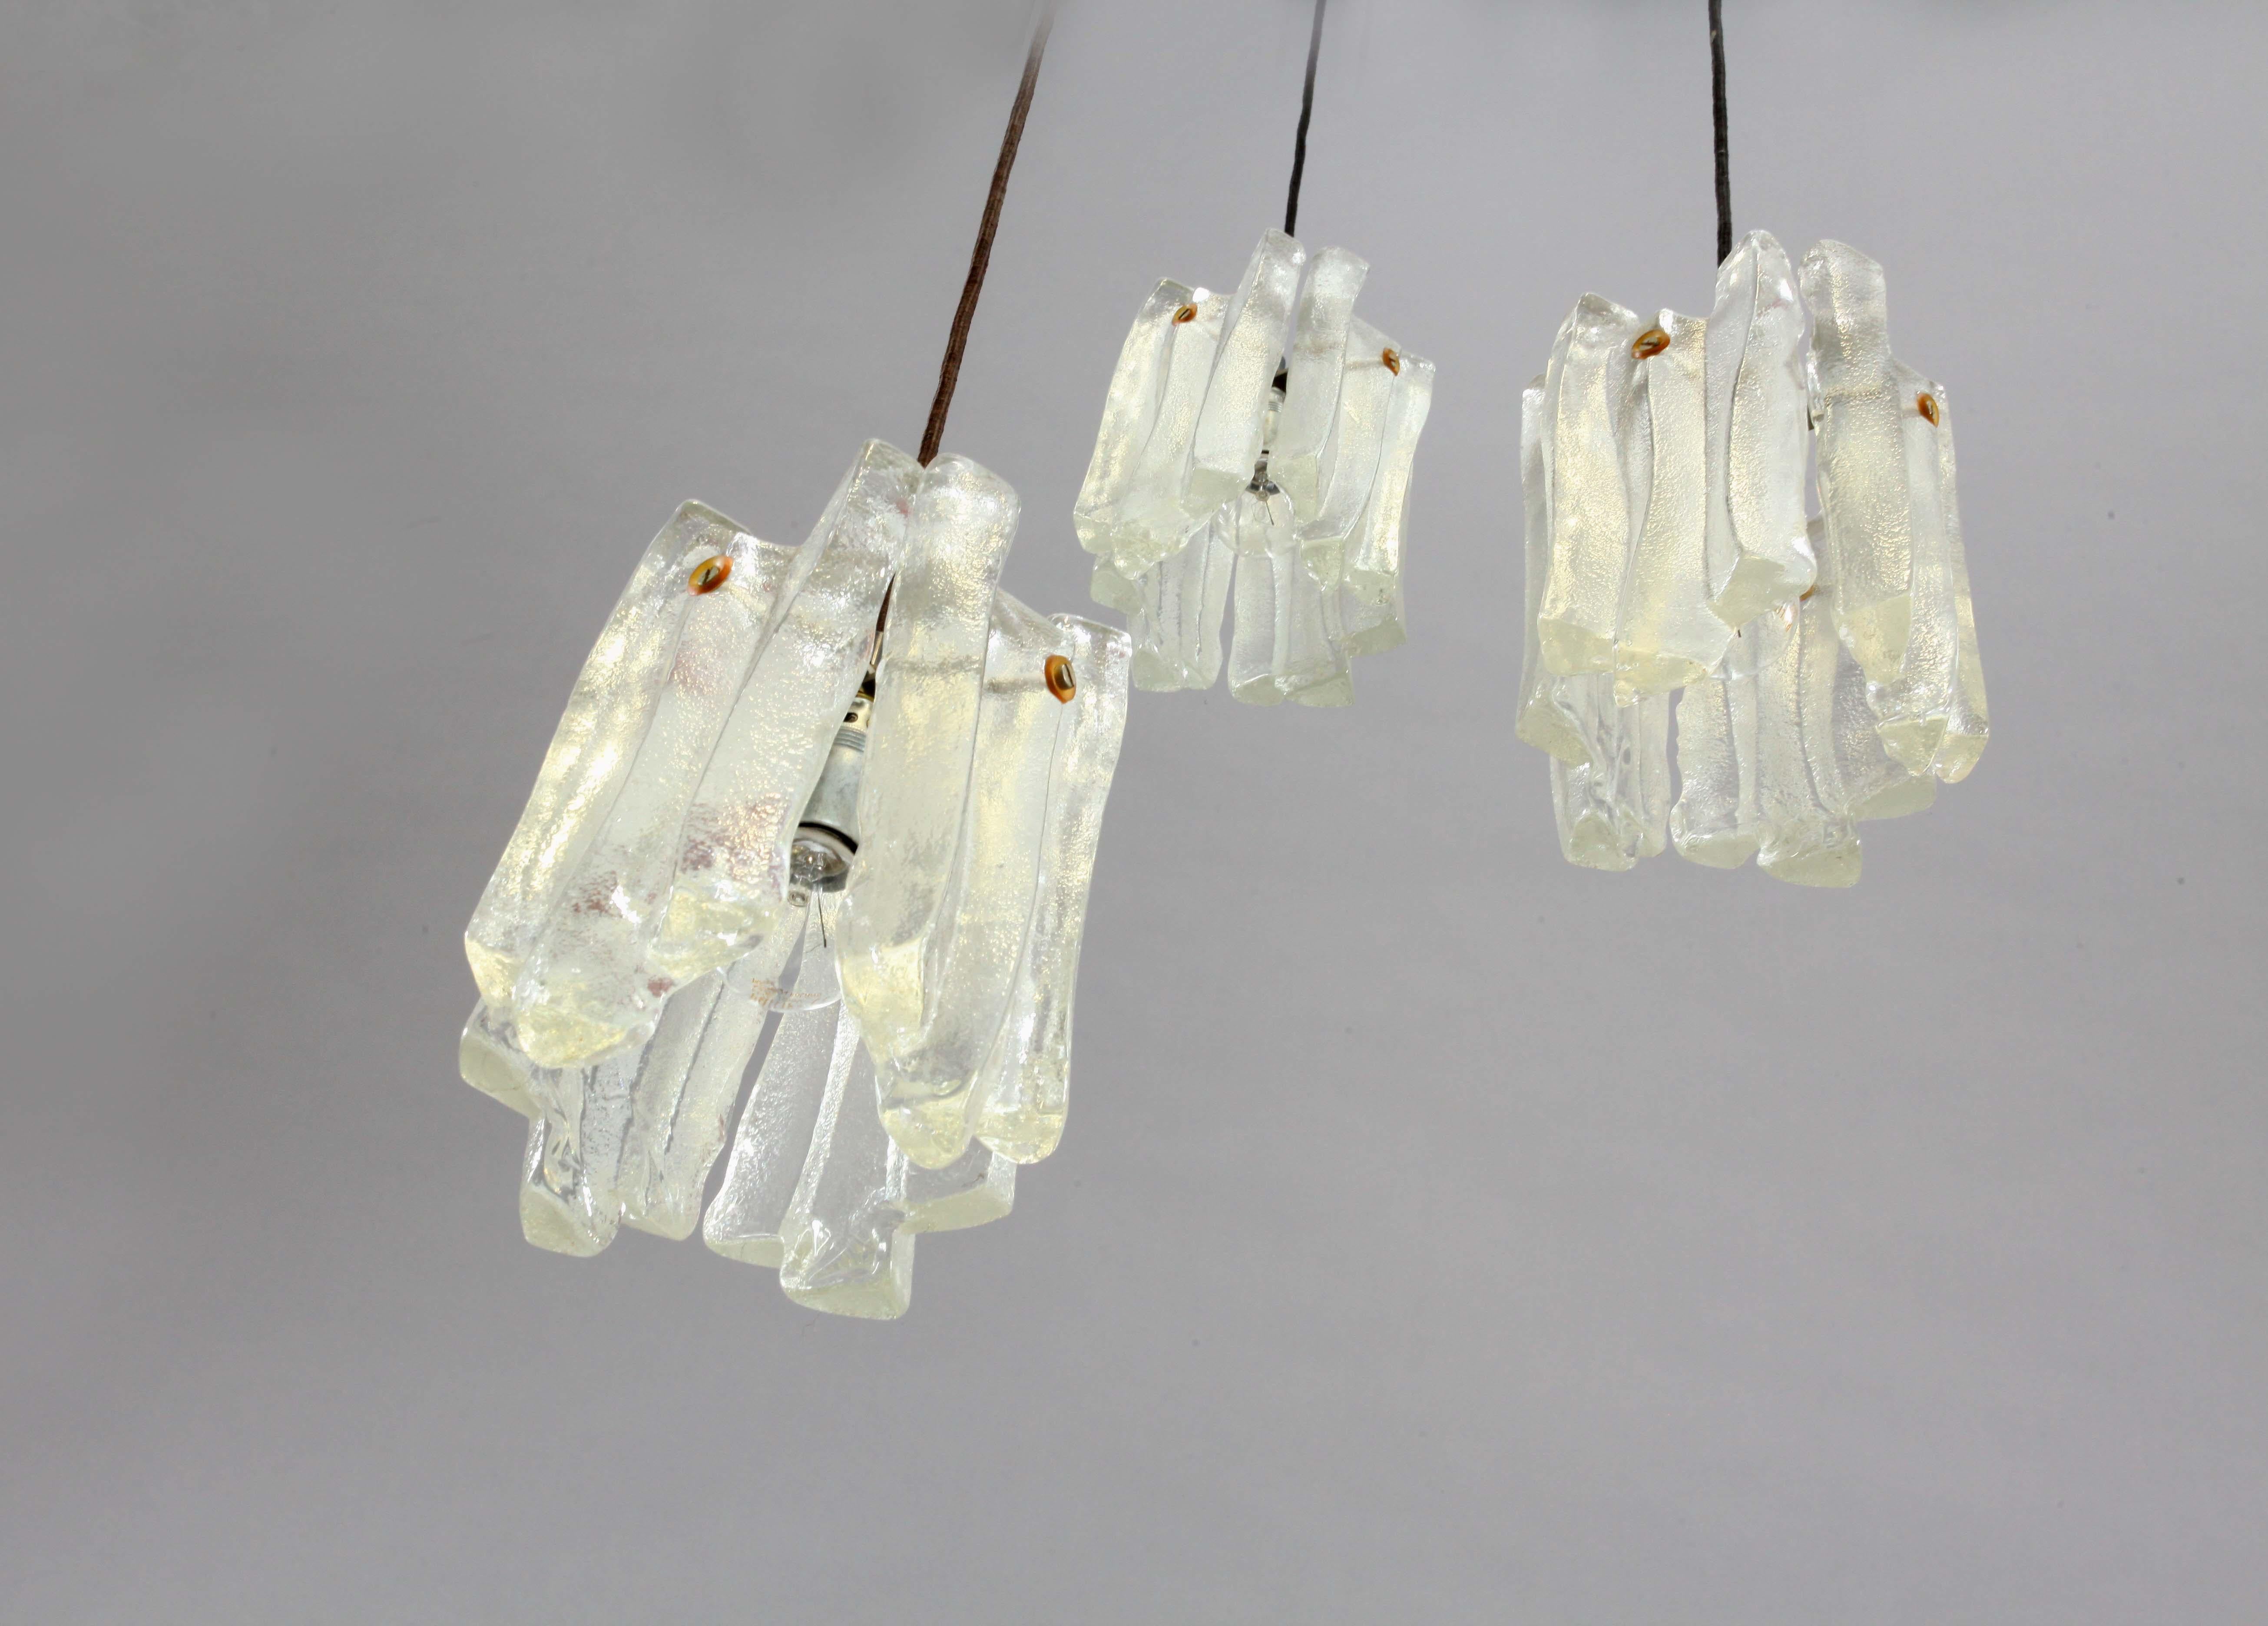 A hanging lamp by Kalmar, Austria, manufactured in midcentury, circa 1970 (end of 1960s and beginning of 1970s). It is made of three frosted ice glass lamp shades which are hanging on a white painted ceiling triangle plate with height adjustable